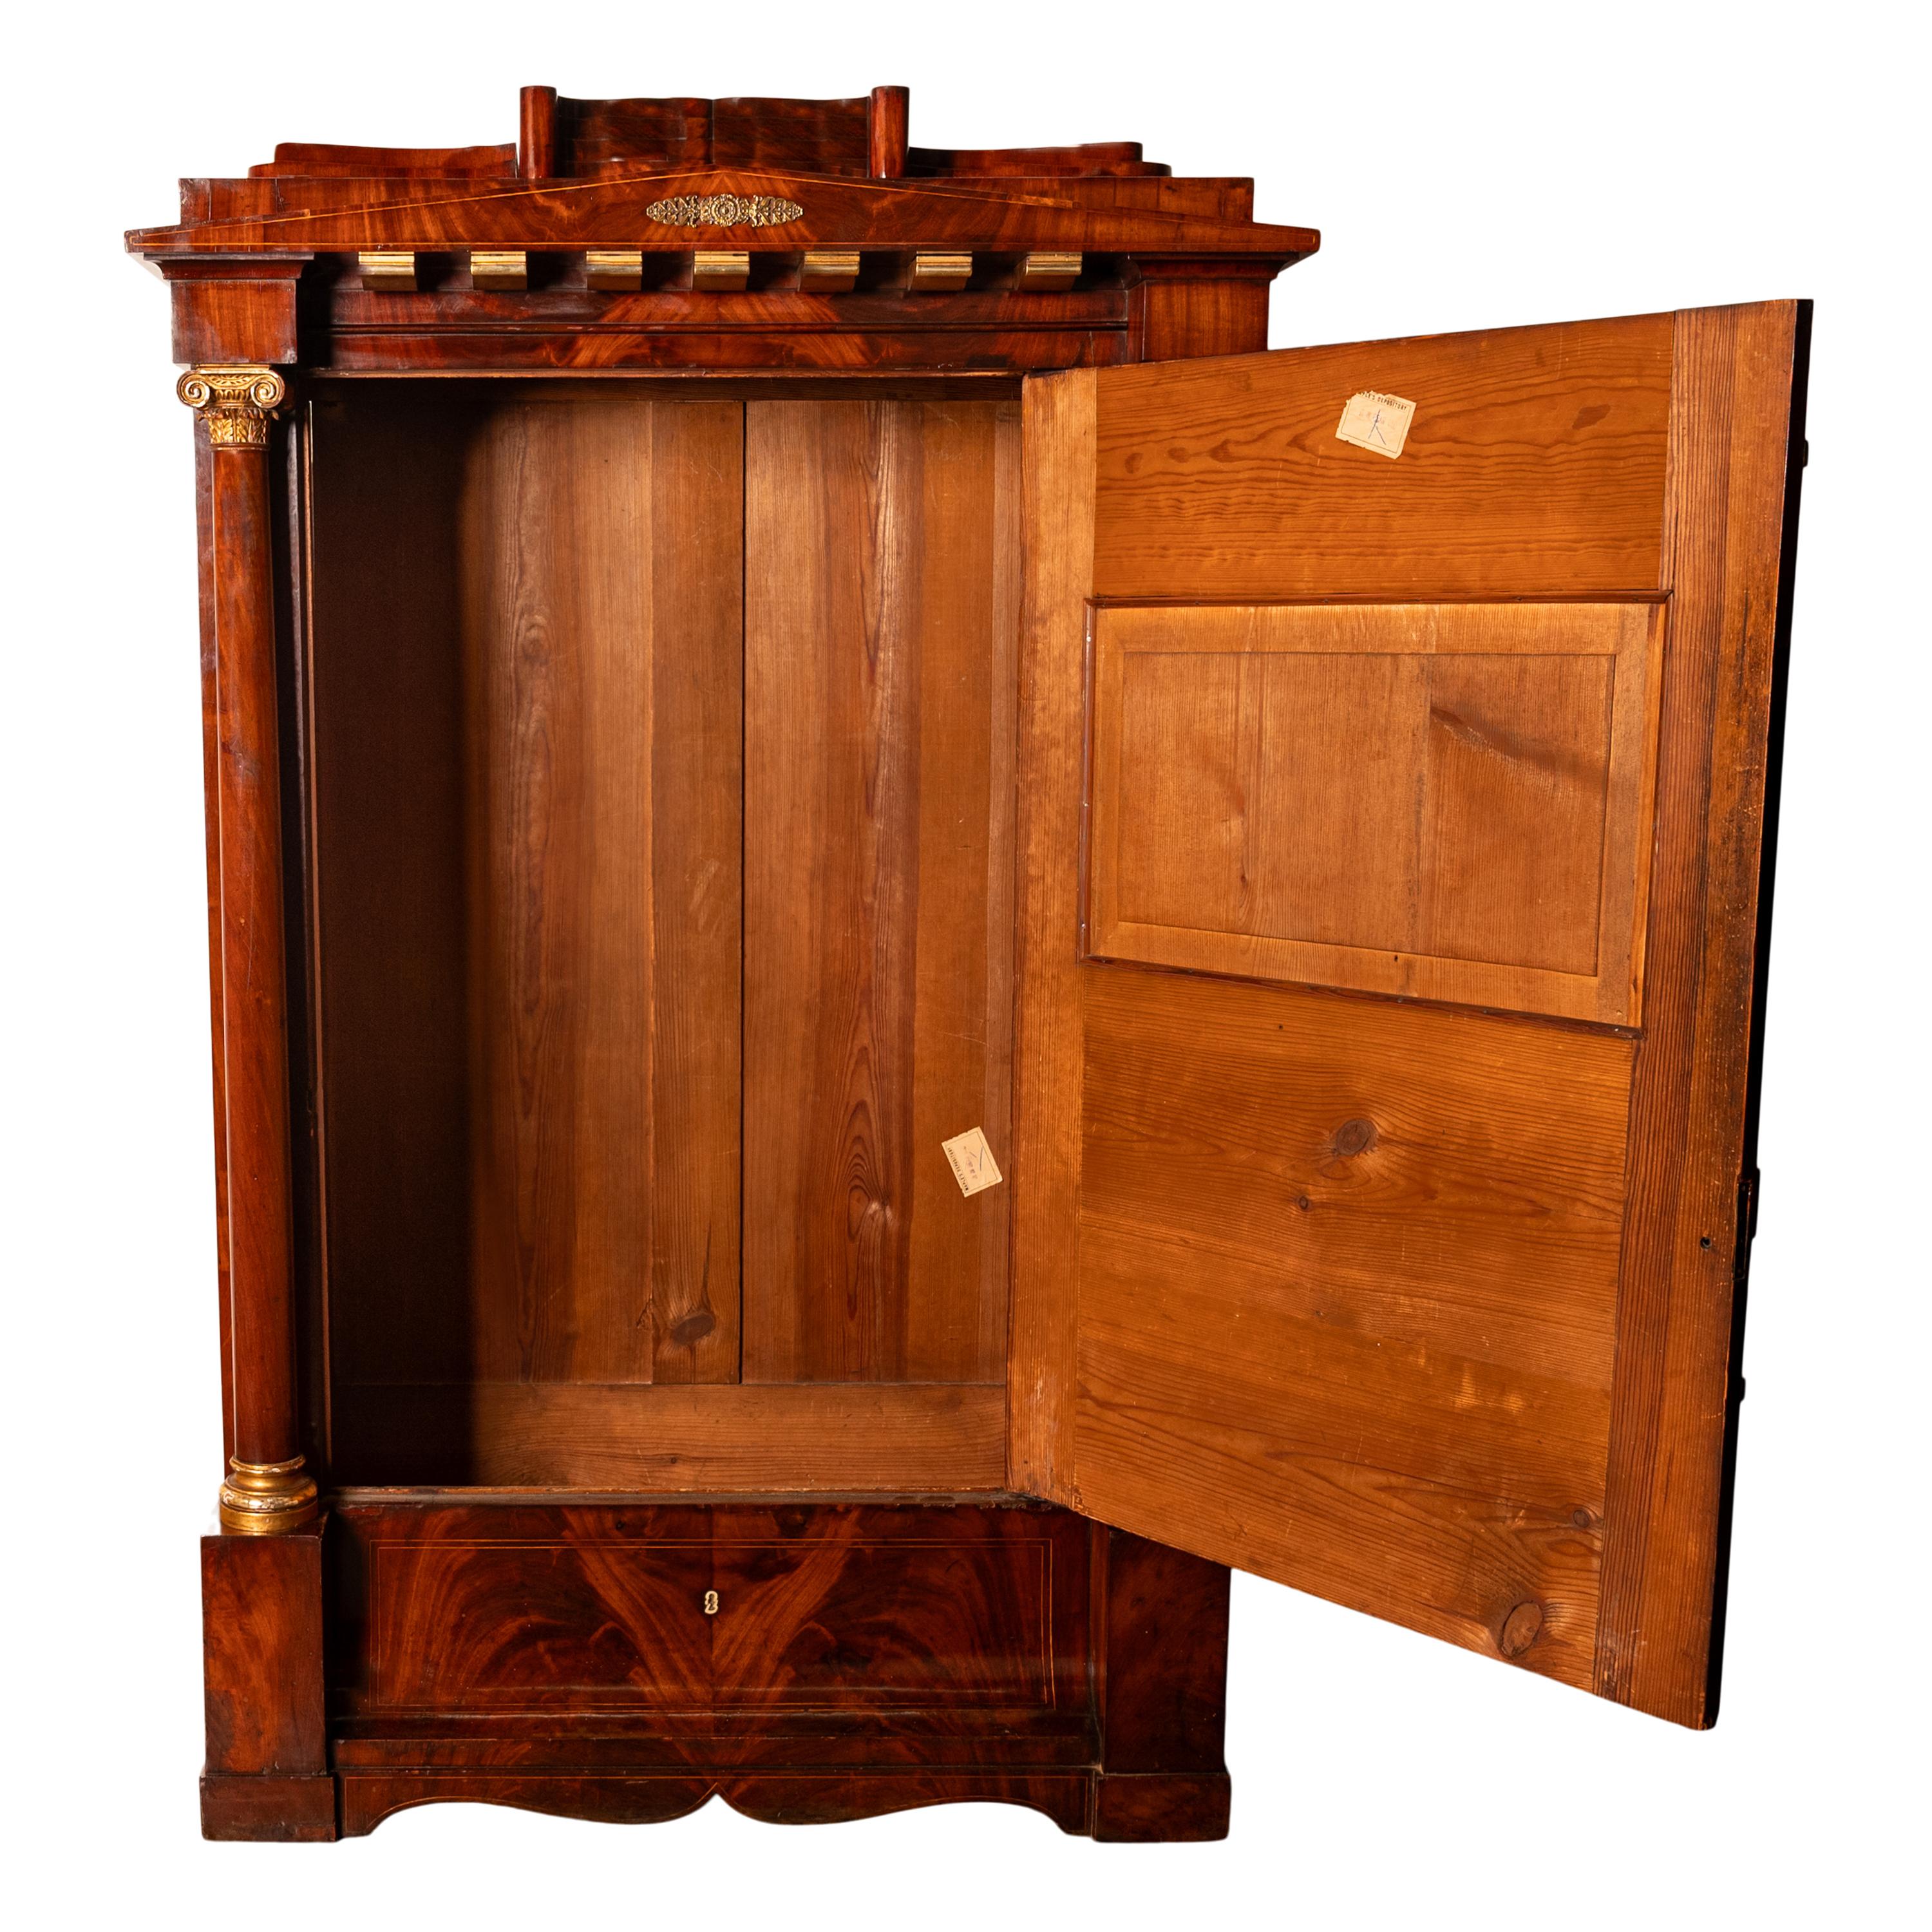 Antique Napoleonic French Empire Parcel-Gilt Mahogany Wine Cabinet Armoire 1810 For Sale 1